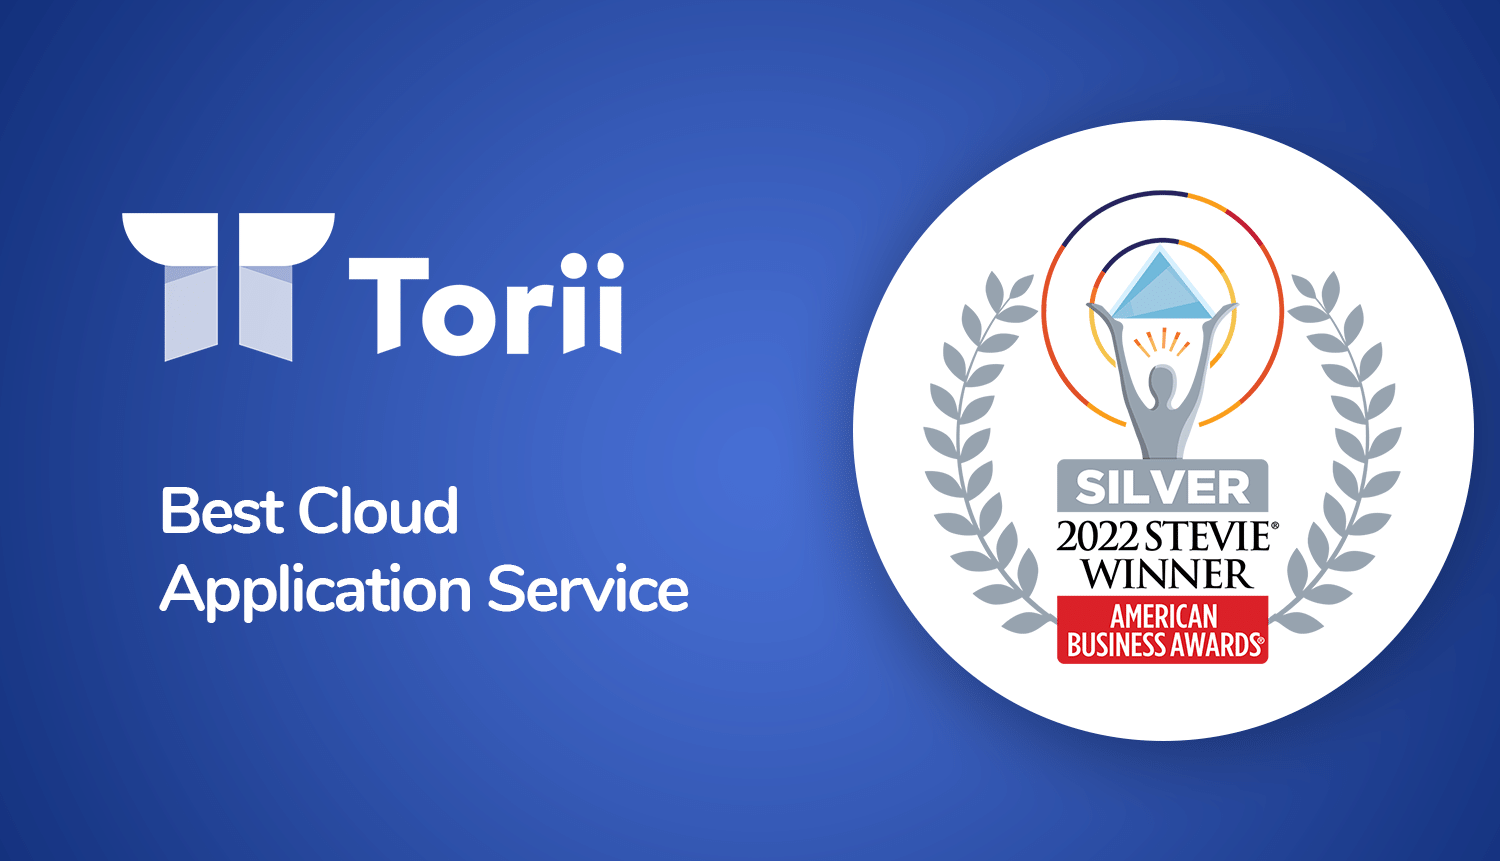 4 Reasons Why Judges Named Torii the 2022 Best Cloud Application Service